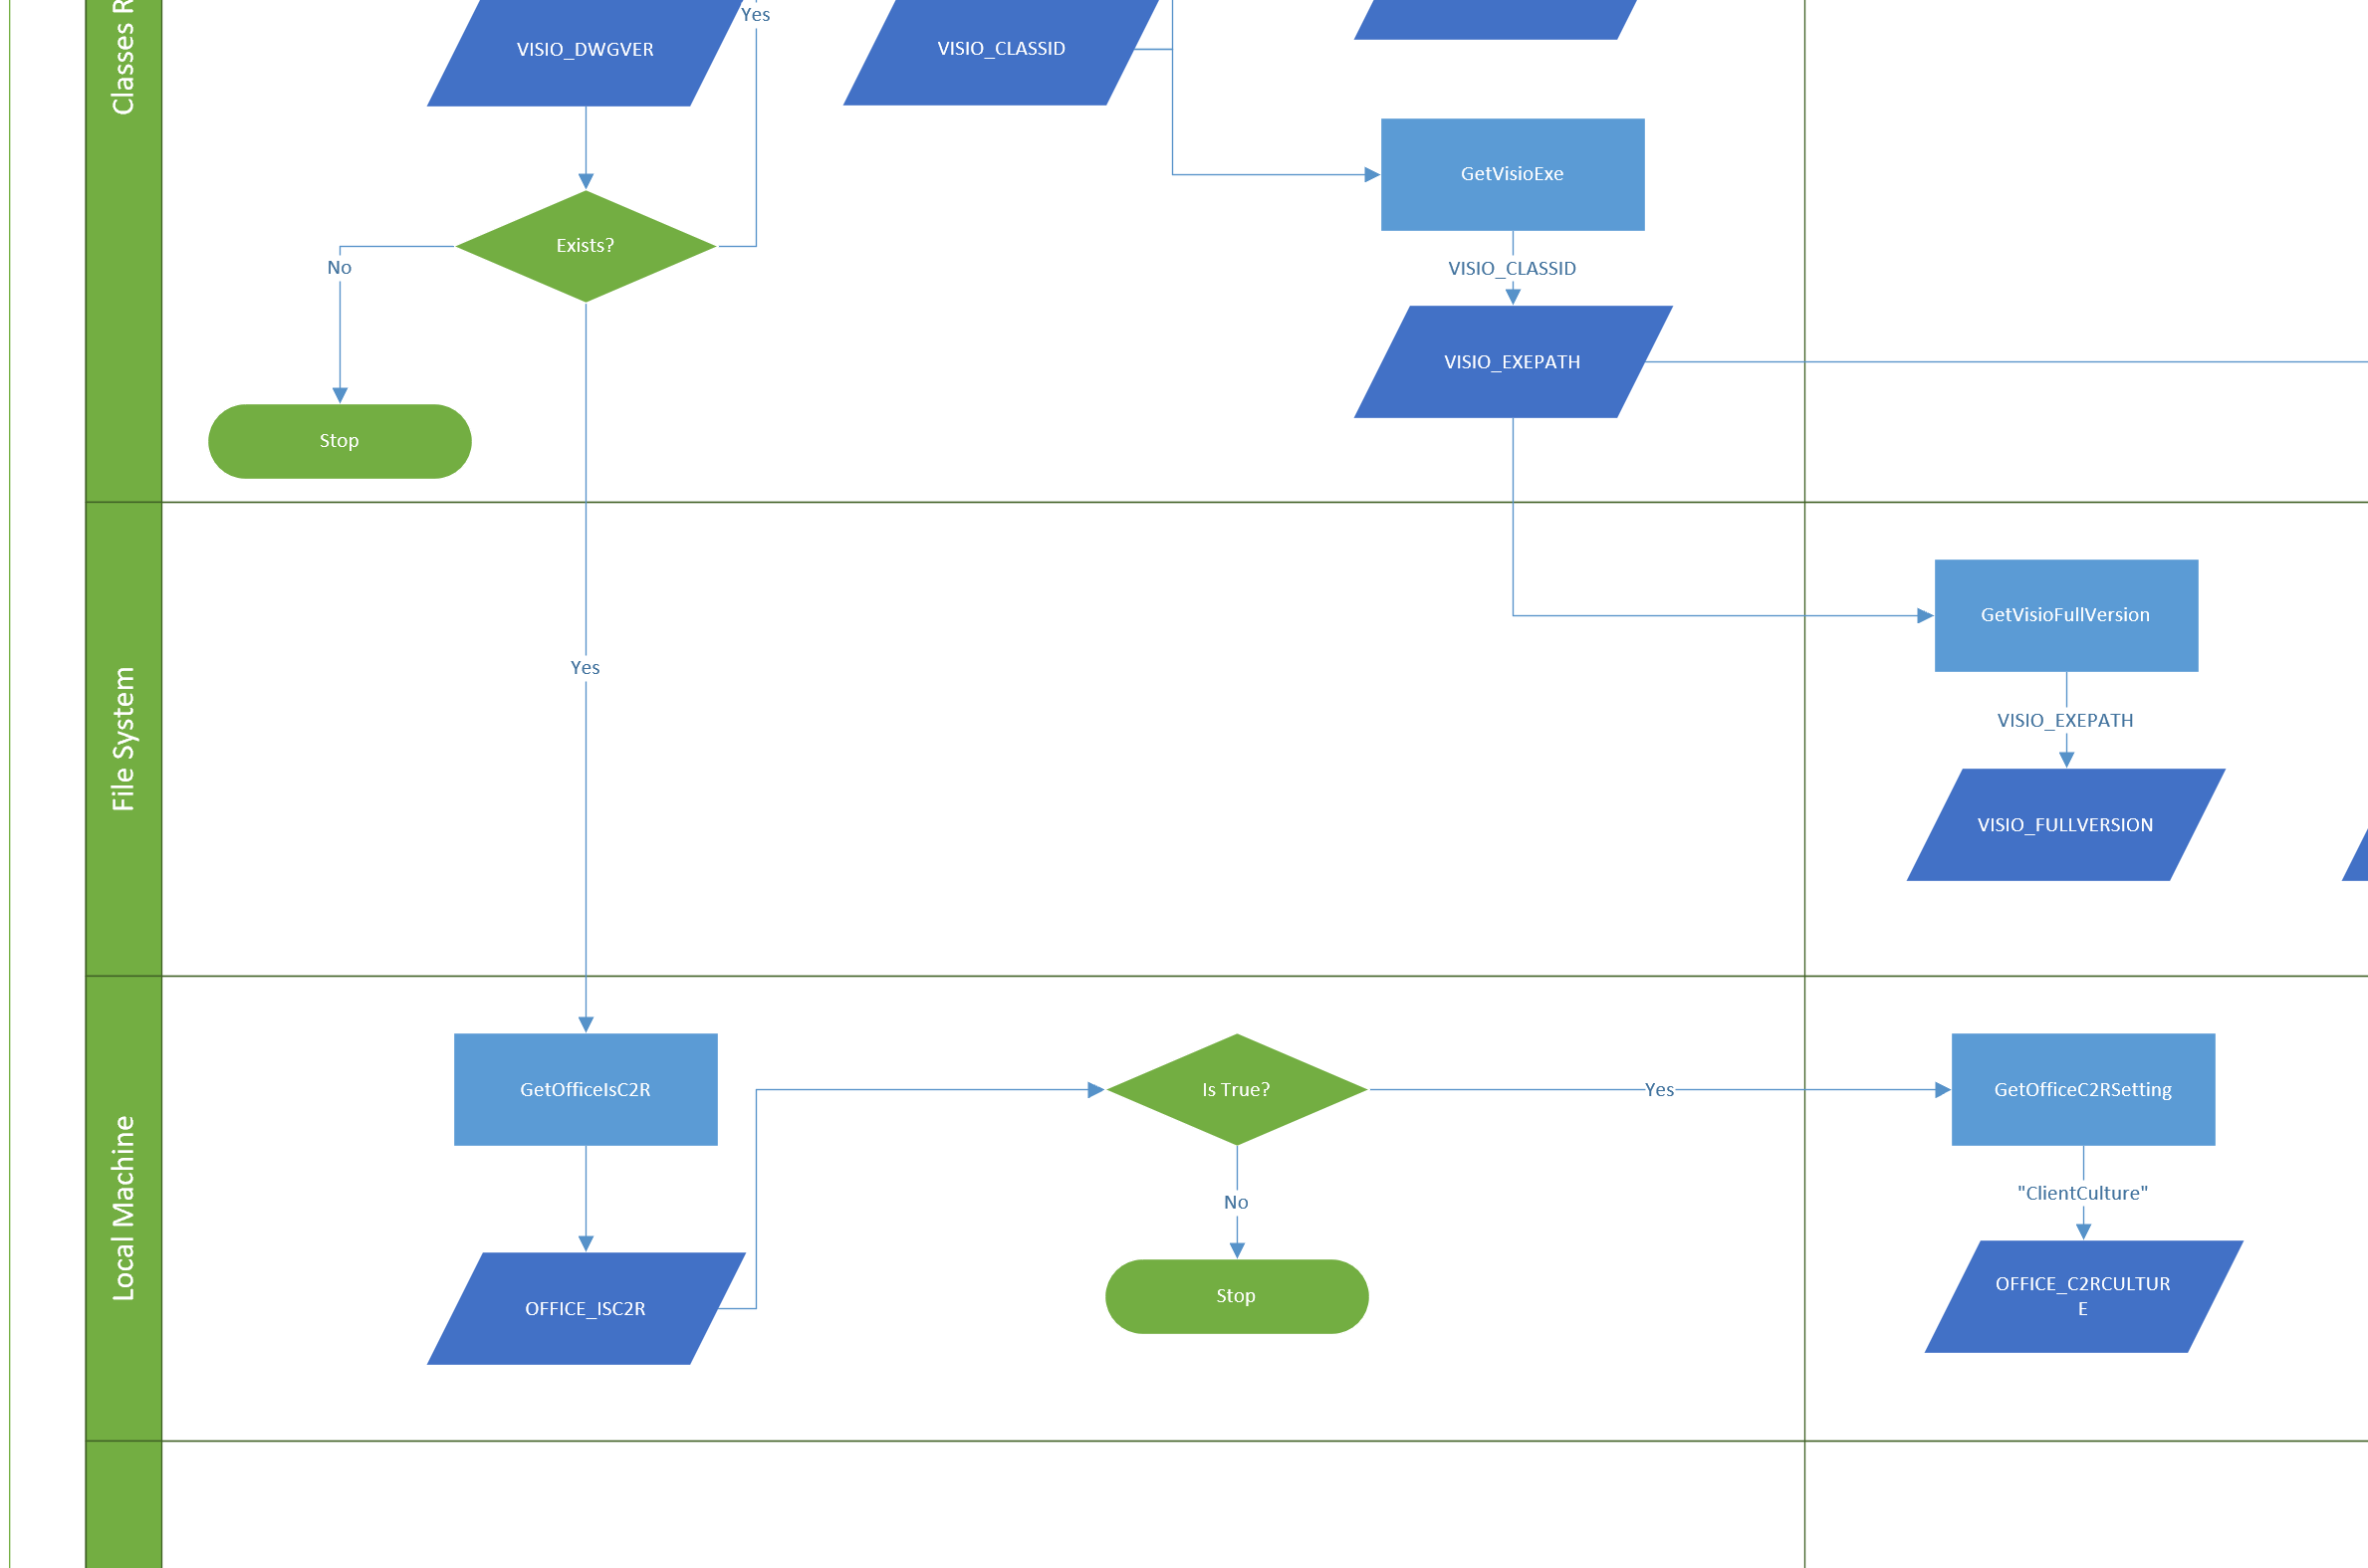 Reading the registry for Visio settings - bVisual